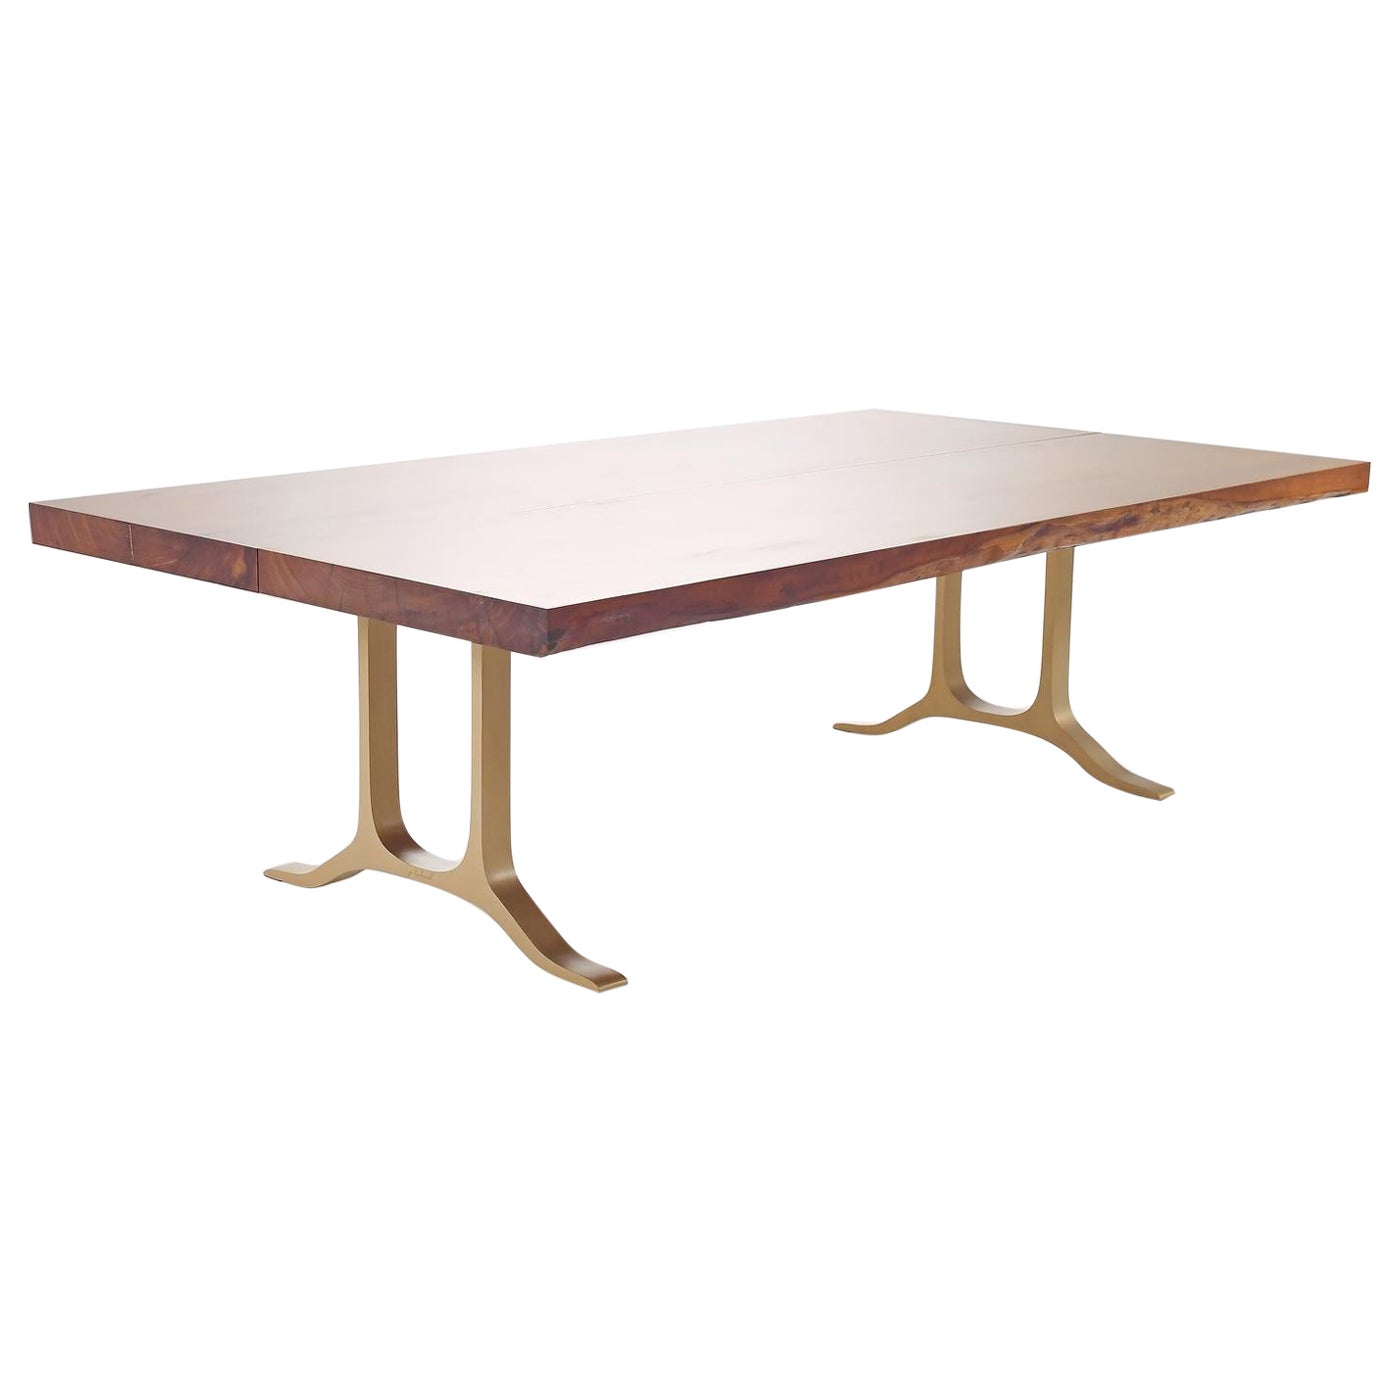 Bespoke Grand Table, Antique Hardwood, Brass Base, by P. Tendercool  For Sale